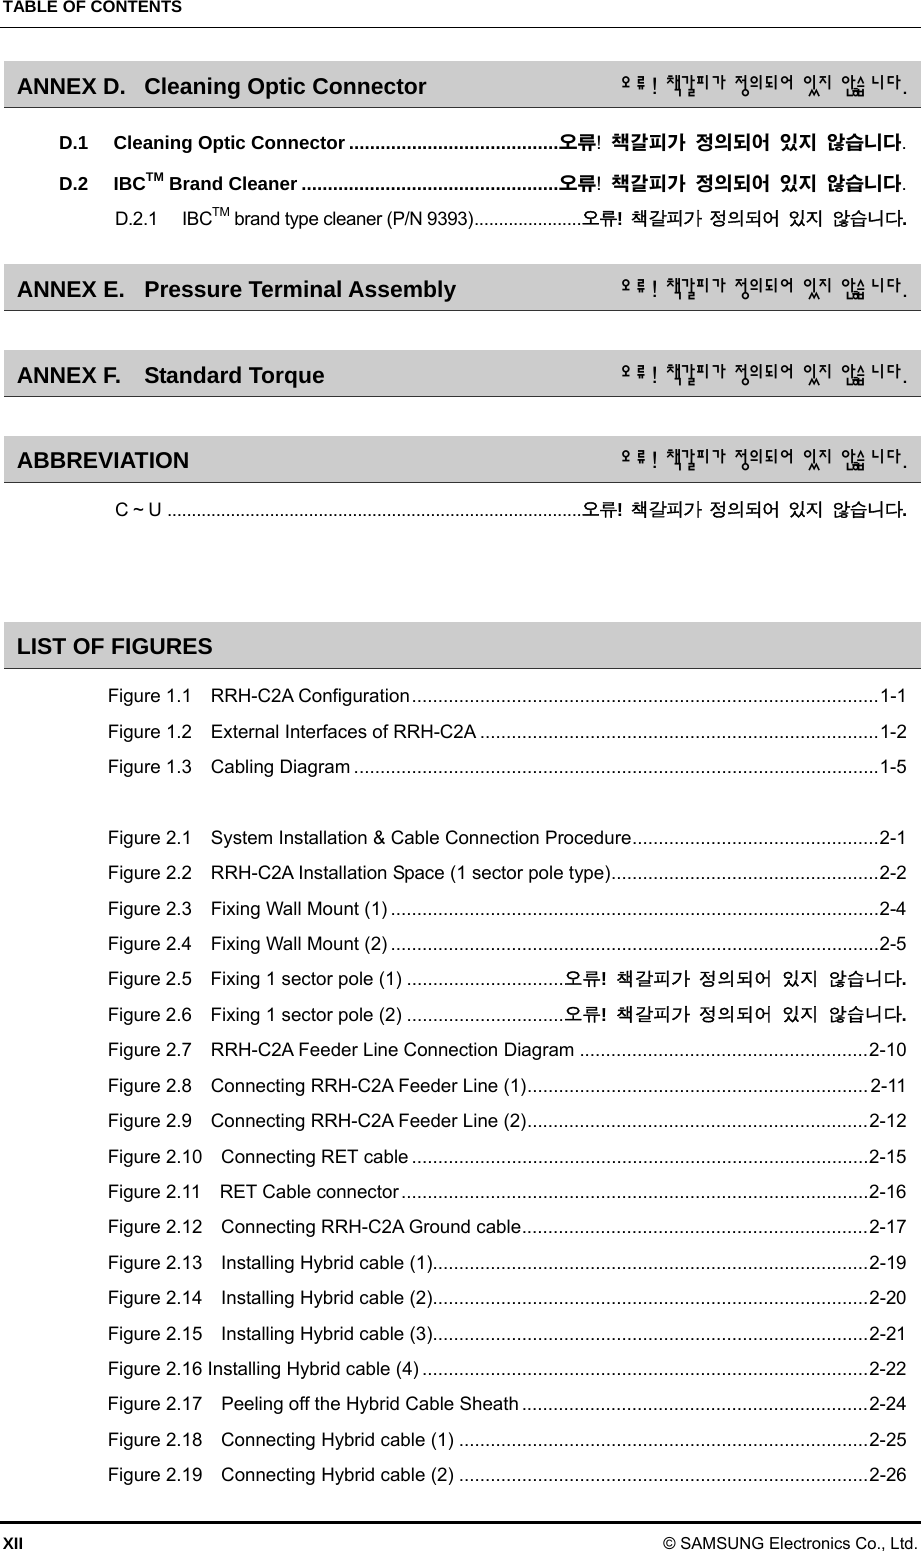 TABLE OF CONTENTS XII © SAMSUNG Electronics Co., Ltd. ANNEX D. Cleaning Optic Connector  오류! 책갈피 가 정의 되 어 있지  않습 니 다. D.1 Cleaning Optic Connector ........................................ 오류!  책갈피가 정의되어 있지 않습니다. D.2 IBCTM Brand Cleaner ................................................. 오류!  책갈피가 정의되어 있지 않습니다. D.2.1 IBCTM brand type cleaner (P/N 9393) ......................오류!  책갈피가 정의되어 있지 않습니다. ANNEX E. Pressure Terminal Assembly  오류! 책갈피 가 정의 되 어 있지  않습 니 다.  ANNEX F. Standard Torque  오류! 책갈피 가 정의 되 어 있지  않습 니 다.  ABBREVIATION  오류! 책갈피 가 정의되 어 있지  않습 니 다. C ~ U  .....................................................................................오류!  책갈피가 정의되어 있지 않습니다.   LIST OF FIGURES Figure 1.1    RRH-C2A Configuration ......................................................................................... 1-1 Figure 1.2  External Interfaces of RRH-C2A ............................................................................ 1-2 Figure 1.3    Cabling Diagram .................................................................................................... 1-5  Figure 2.1    System Installation &amp; Cable Connection Procedure ............................................... 2-1 Figure 2.2    RRH-C2A Installation Space (1 sector pole type) ................................................... 2-2 Figure 2.3  Fixing Wall Mount (1) ............................................................................................. 2-4 Figure 2.4  Fixing Wall Mount (2) ............................................................................................. 2-5 Figure 2.5  Fixing 1 sector pole (1) .............................. 오류!  책갈피가 정의되어 있지 않습니다. Figure 2.6  Fixing 1 sector pole (2) .............................. 오류!  책갈피가 정의되어 있지 않습니다. Figure 2.7    RRH-C2A Feeder Line Connection Diagram ....................................................... 2-10 Figure 2.8    Connecting RRH-C2A Feeder Line (1) ................................................................. 2-11 Figure 2.9    Connecting RRH-C2A Feeder Line (2) ................................................................. 2-12 Figure 2.10  Connecting RET cable ....................................................................................... 2-15 Figure 2.11  RET Cable connector ......................................................................................... 2-16 Figure 2.12    Connecting RRH-C2A Ground cable .................................................................. 2-17 Figure 2.13  Installing Hybrid cable (1)................................................................................... 2-19 Figure 2.14  Installing Hybrid cable (2)................................................................................... 2-20 Figure 2.15  Installing Hybrid cable (3)................................................................................... 2-21 Figure 2.16 Installing Hybrid cable (4) ..................................................................................... 2-22 Figure 2.17    Peeling off the Hybrid Cable Sheath .................................................................. 2-24 Figure 2.18  Connecting Hybrid cable (1) .............................................................................. 2-25 Figure 2.19  Connecting Hybrid cable (2) .............................................................................. 2-26 